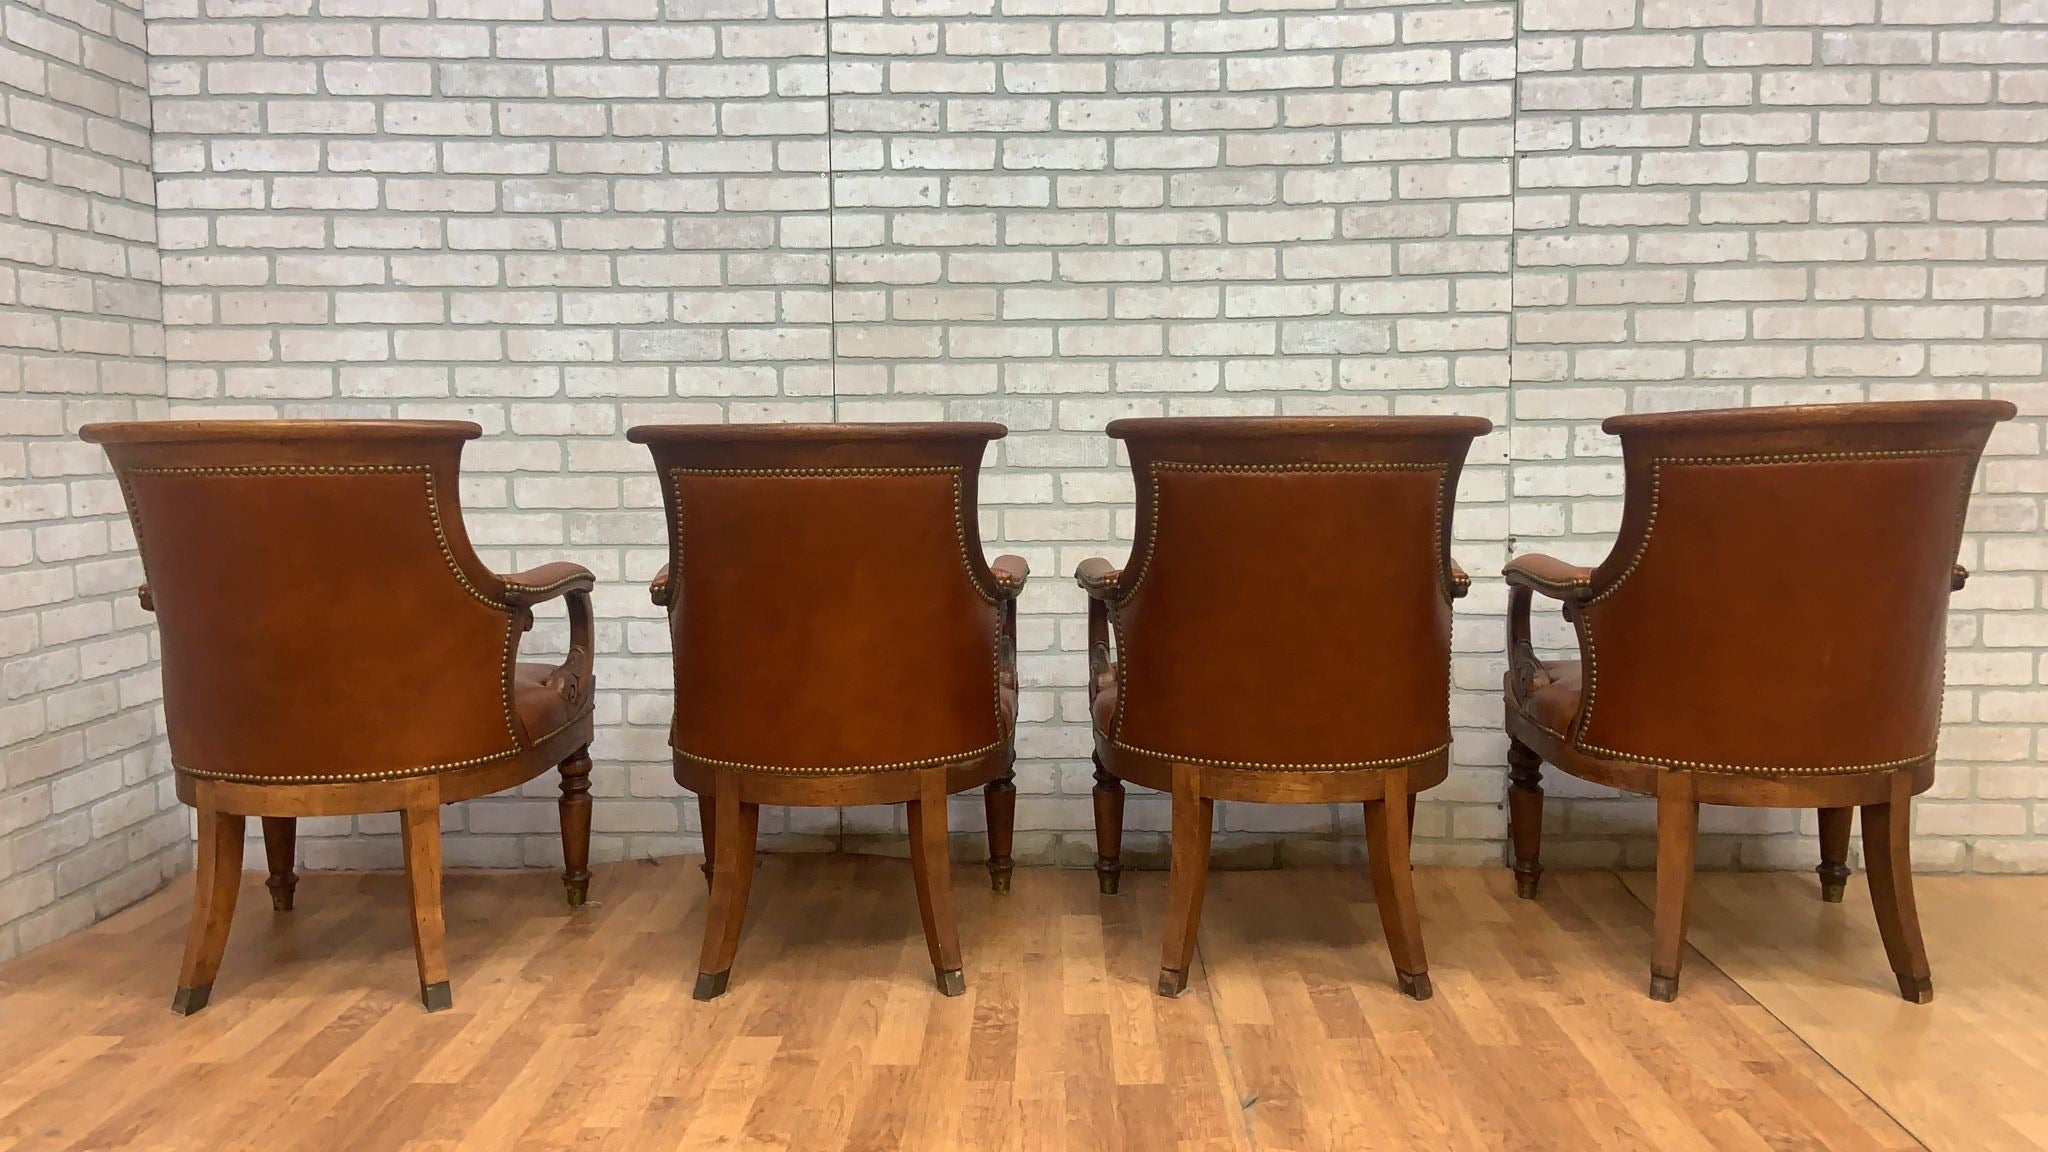 Vintage Hancock and Moore Tufted Jockey Club Chair Newly Upholstered in Leather - Set of 4